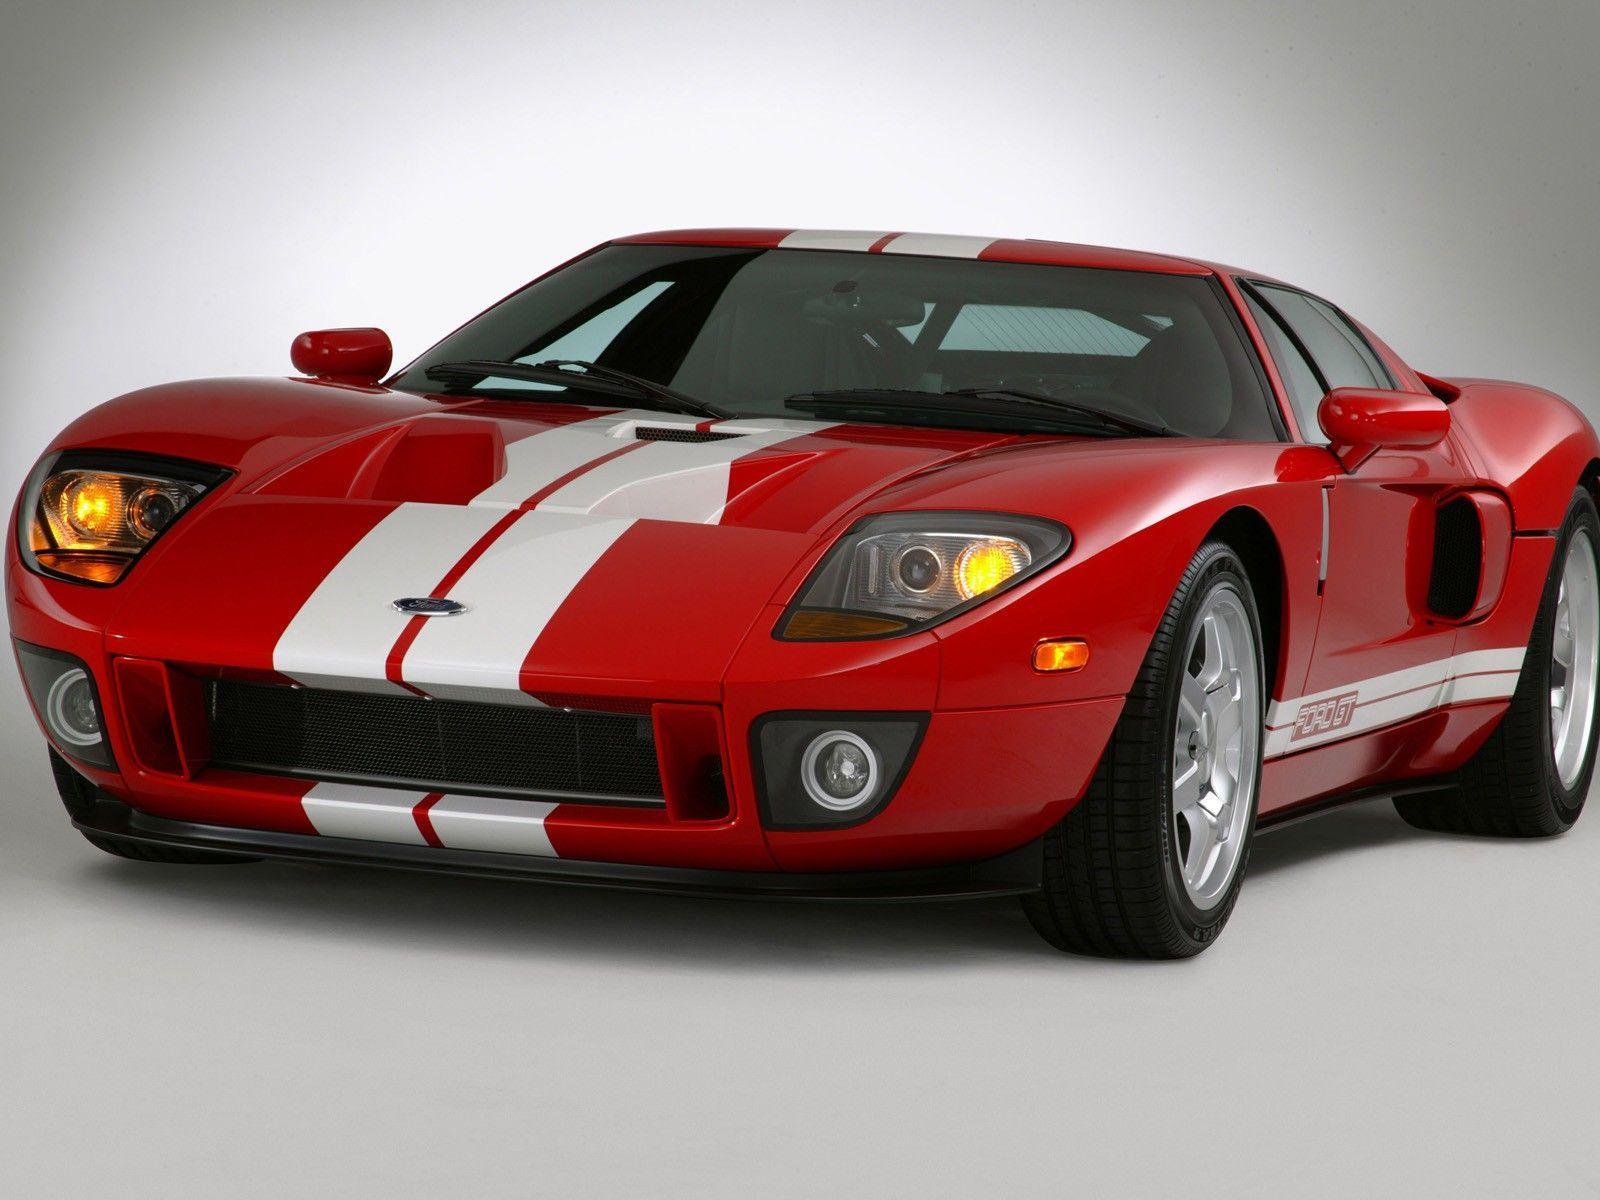 Car: Surprising Ford Gt Wallpaper Background